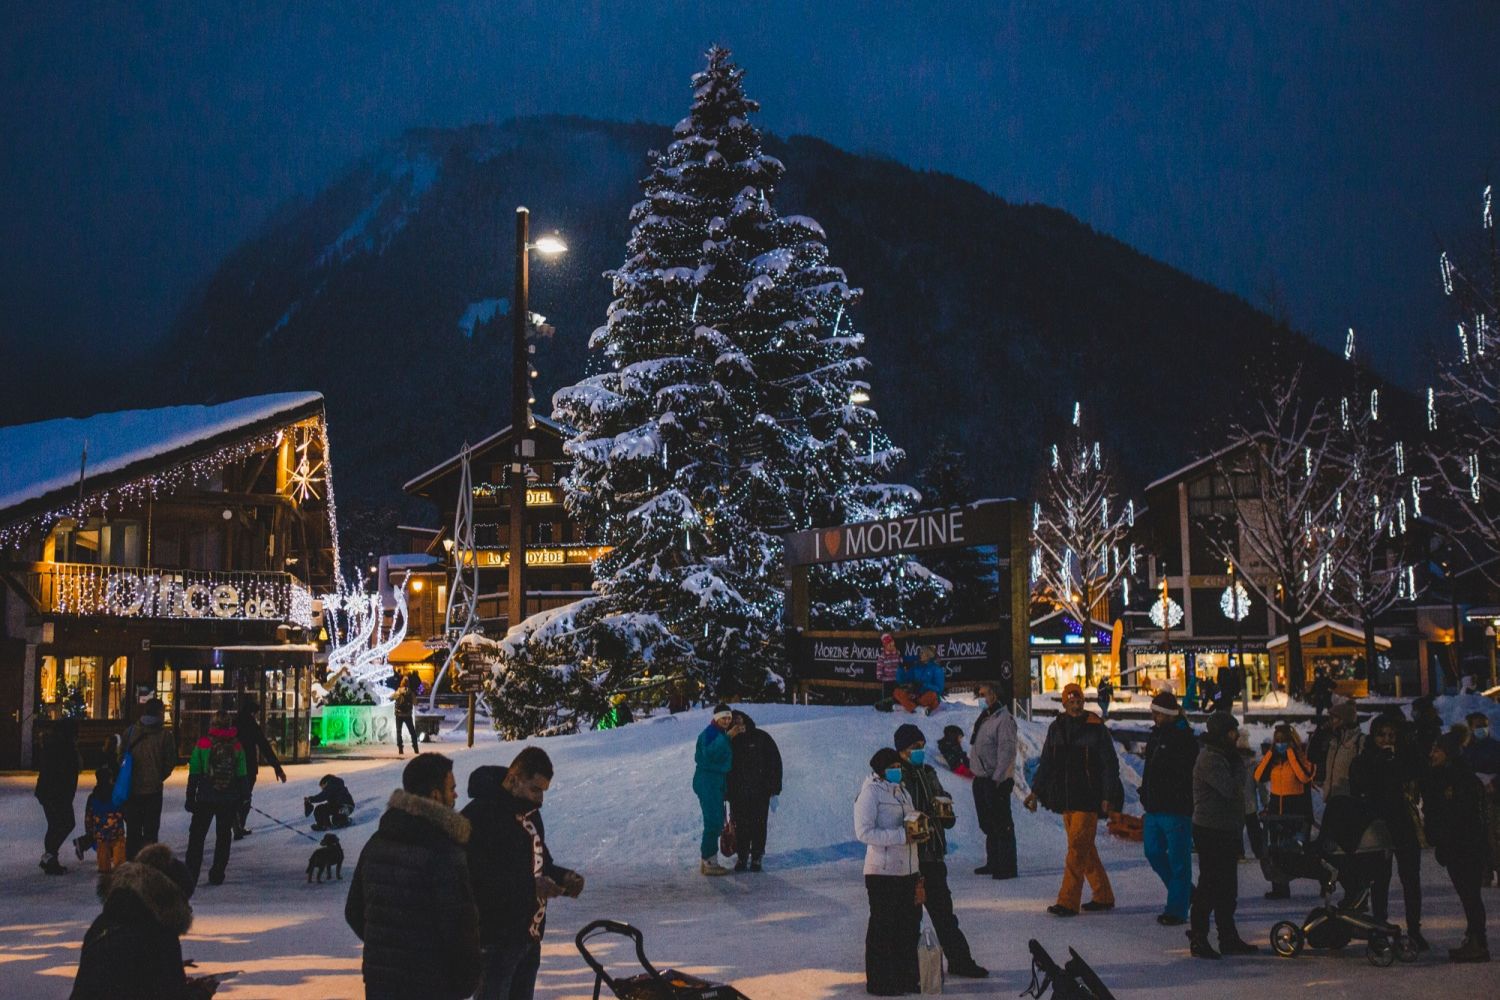 Christmas tree in Morzine town centre with I love Morzine sign